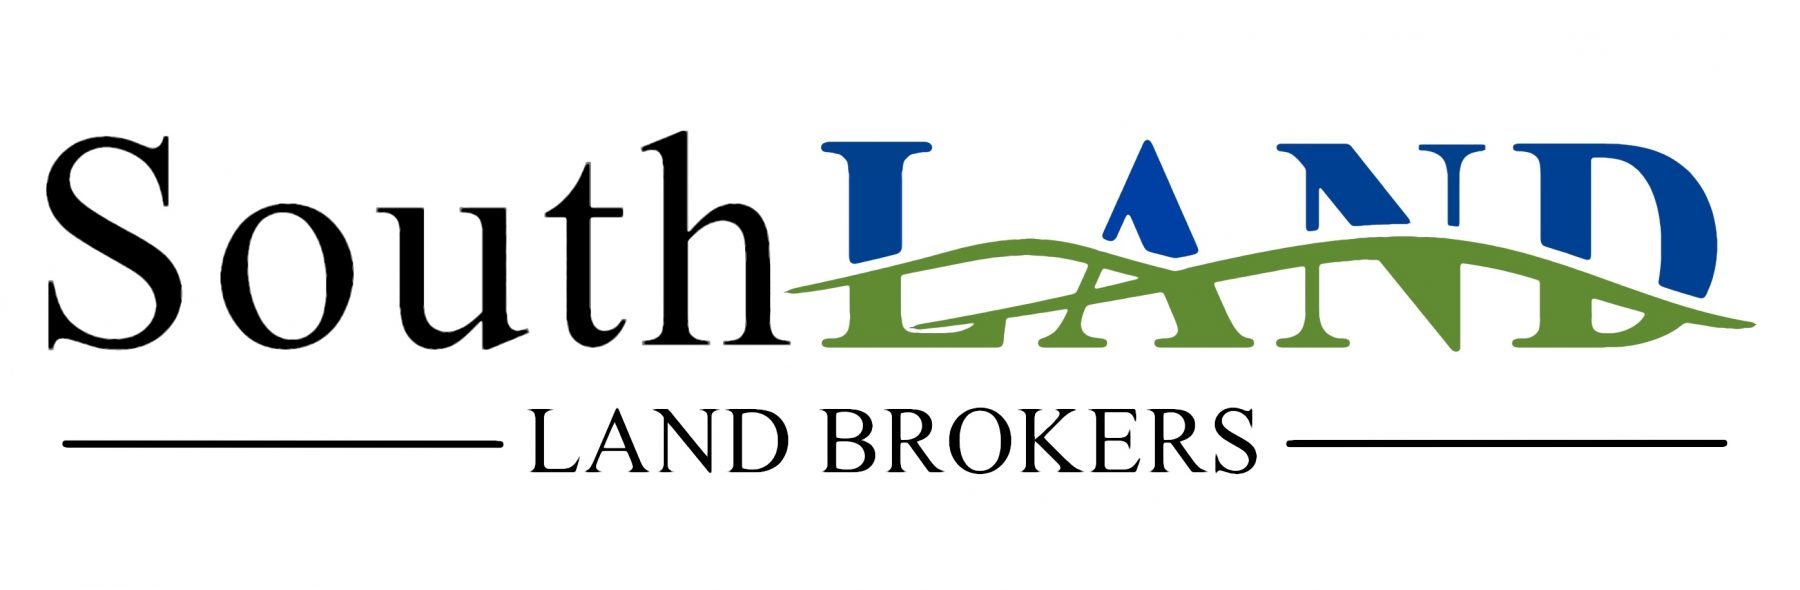 Southland Land Brokers